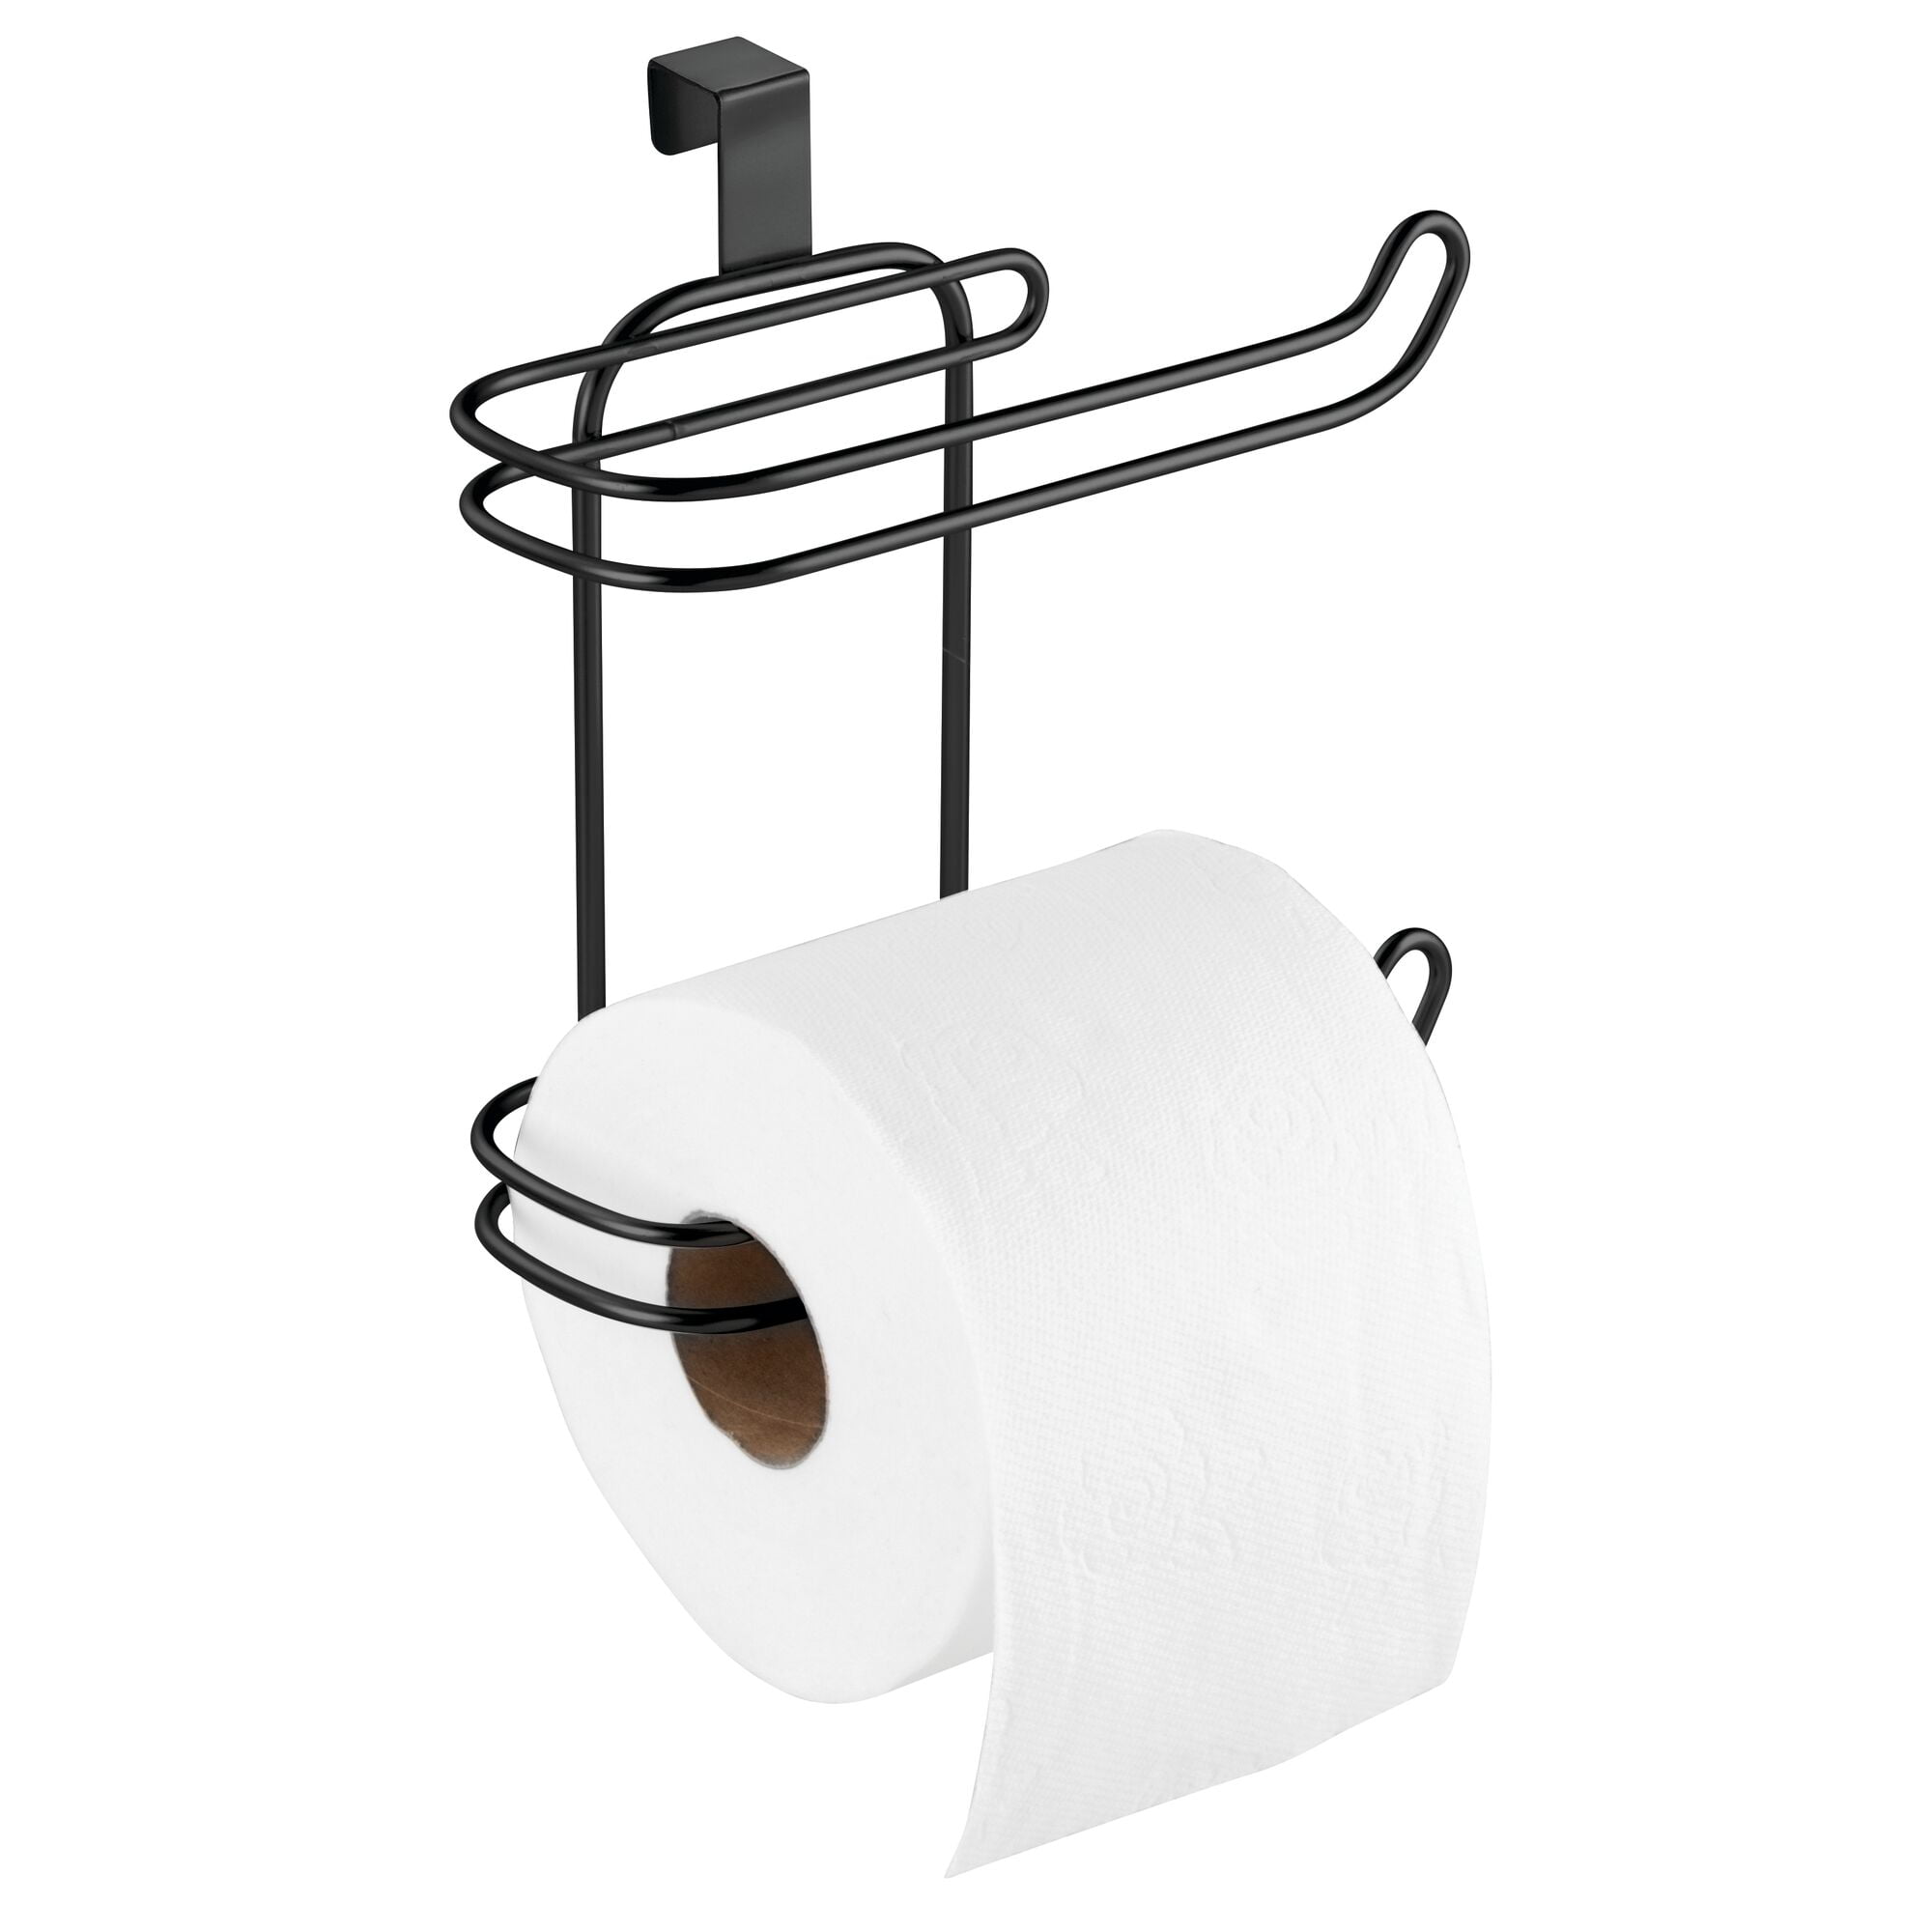 Holds Jumbo-Sized Rolls Durable Metal Wire in Bronze Stores Three Extra Rolls mDesign Modern Over the Tank Hanging Toilet Tissue Paper Roll Holder and Reserve for Bathroom Storage 